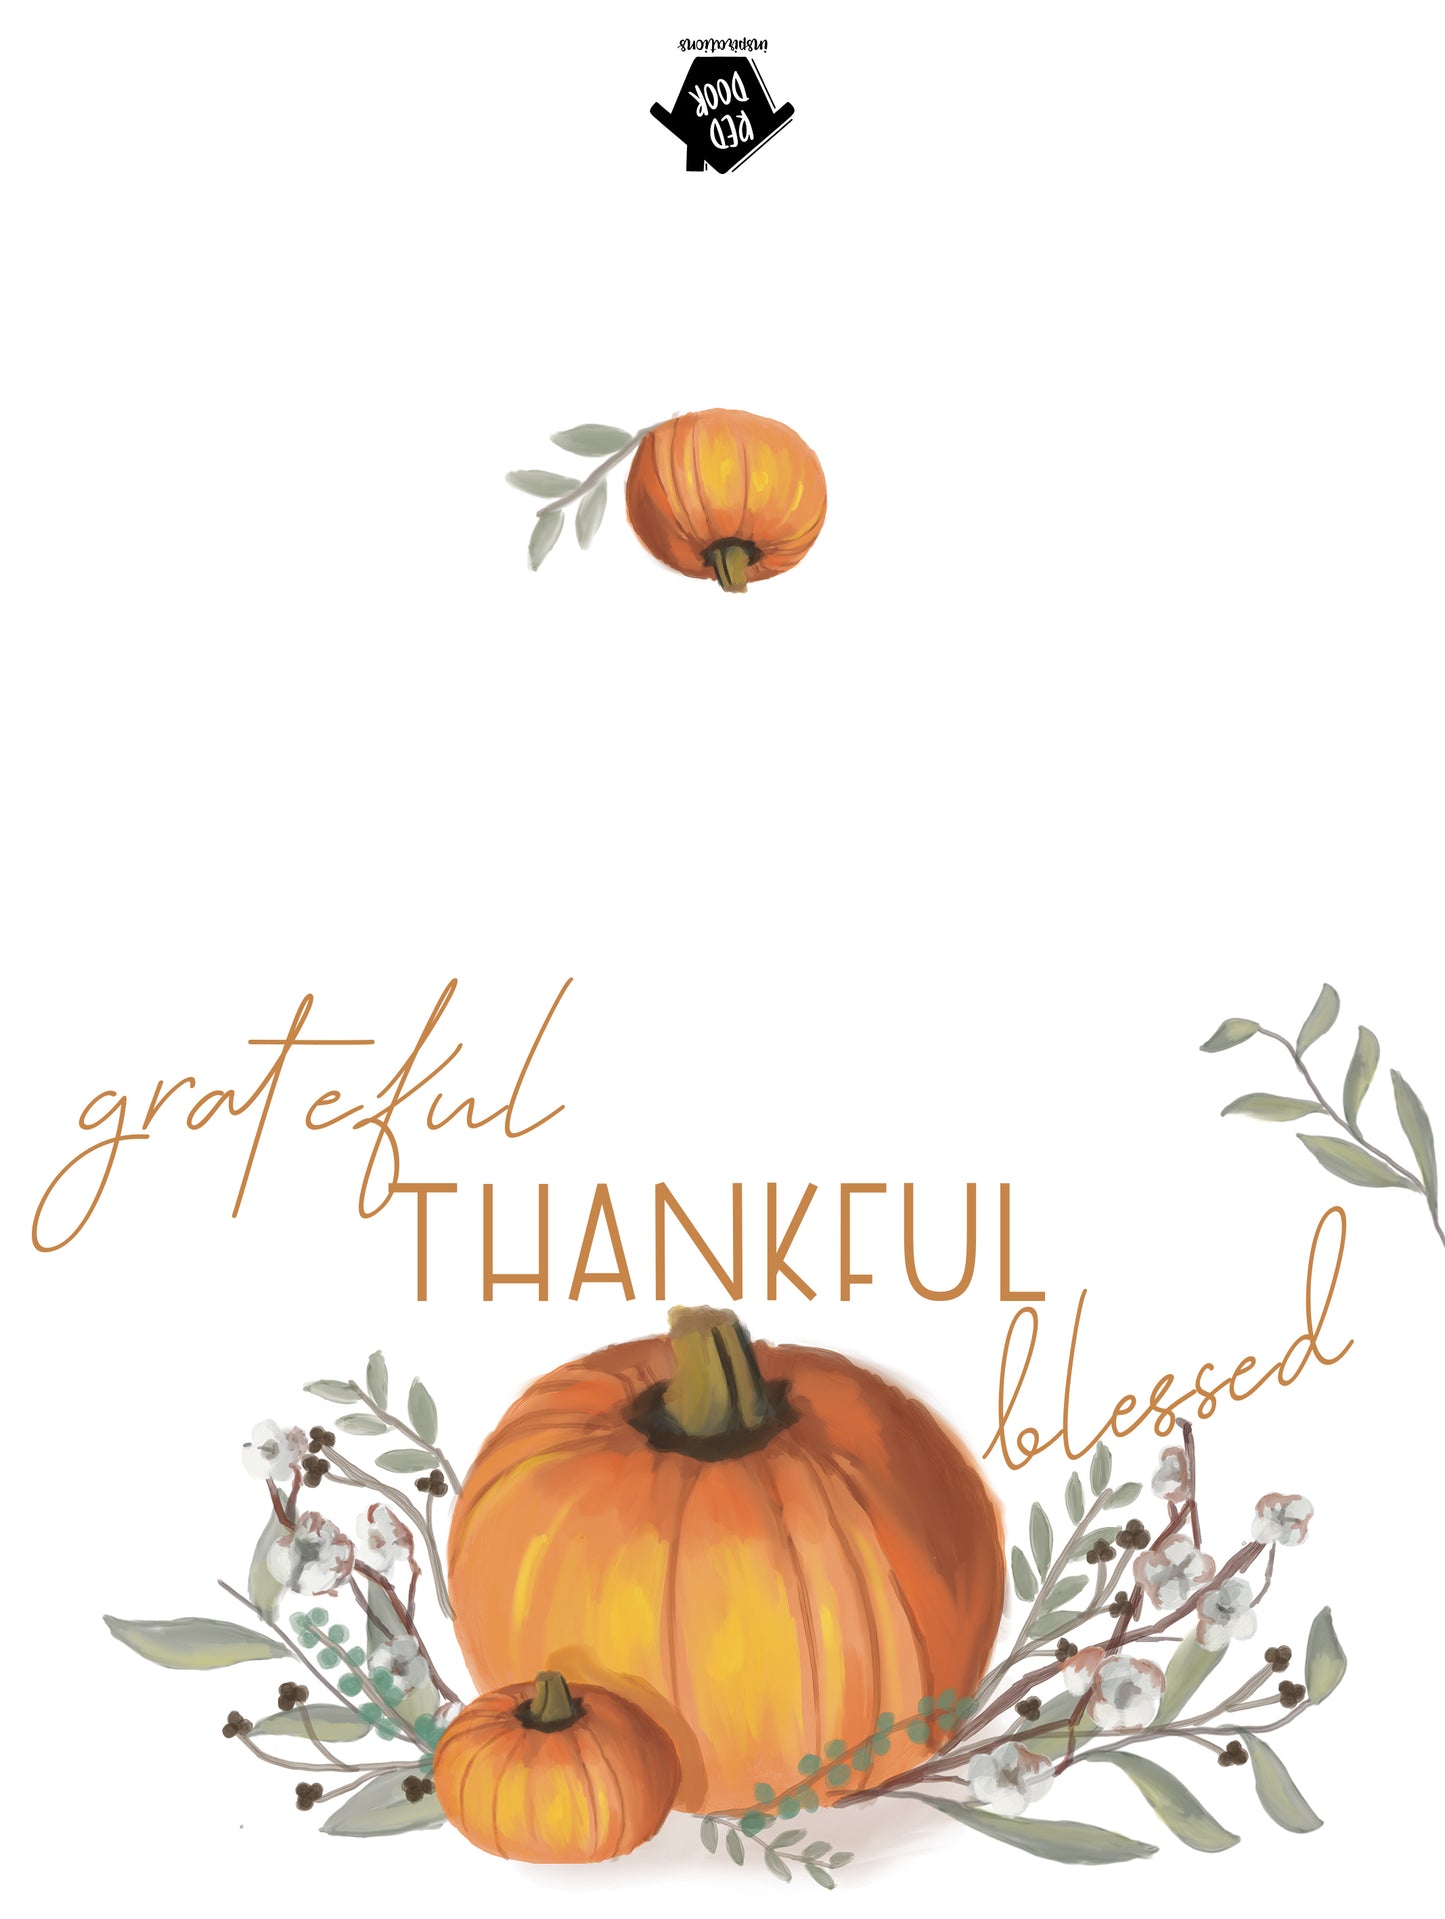 Grateful, Thankful, Blessed - Includes 25 cards